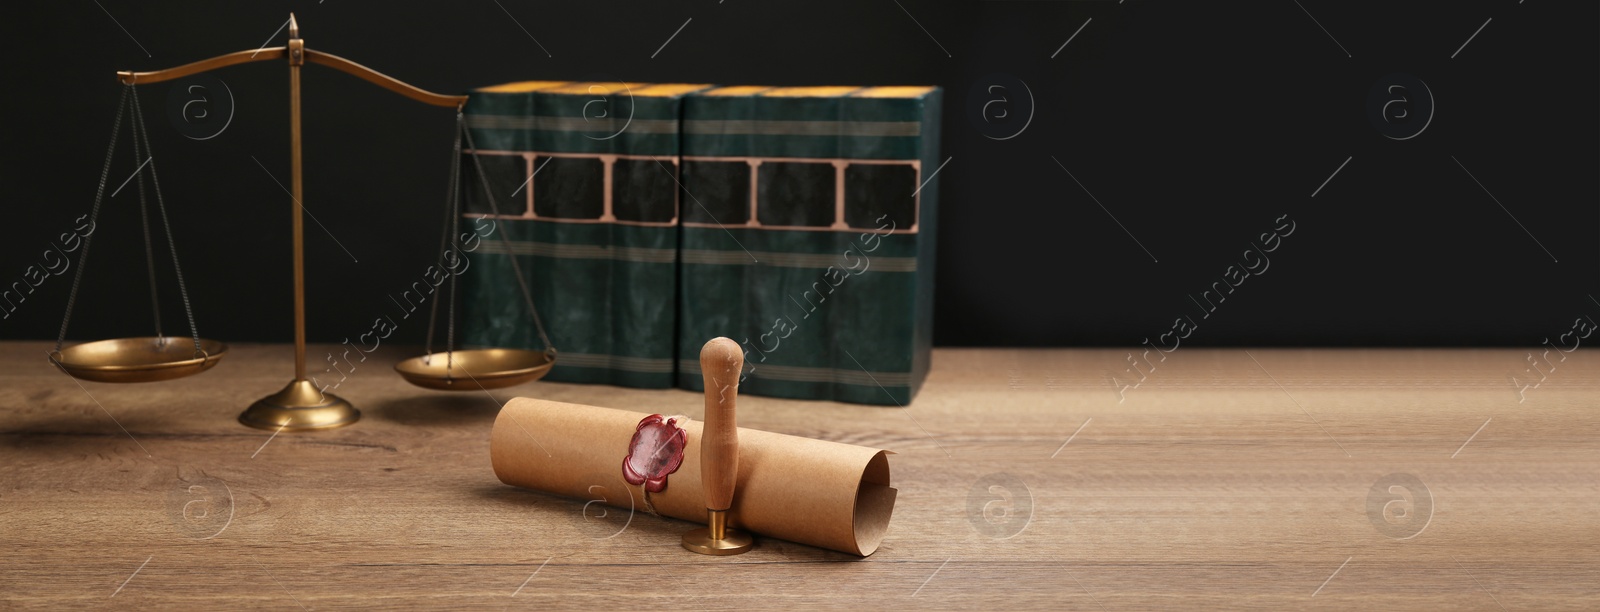 Image of Notary's public pen, sealed document and scales on wooden table against black background, space for text. Banner design